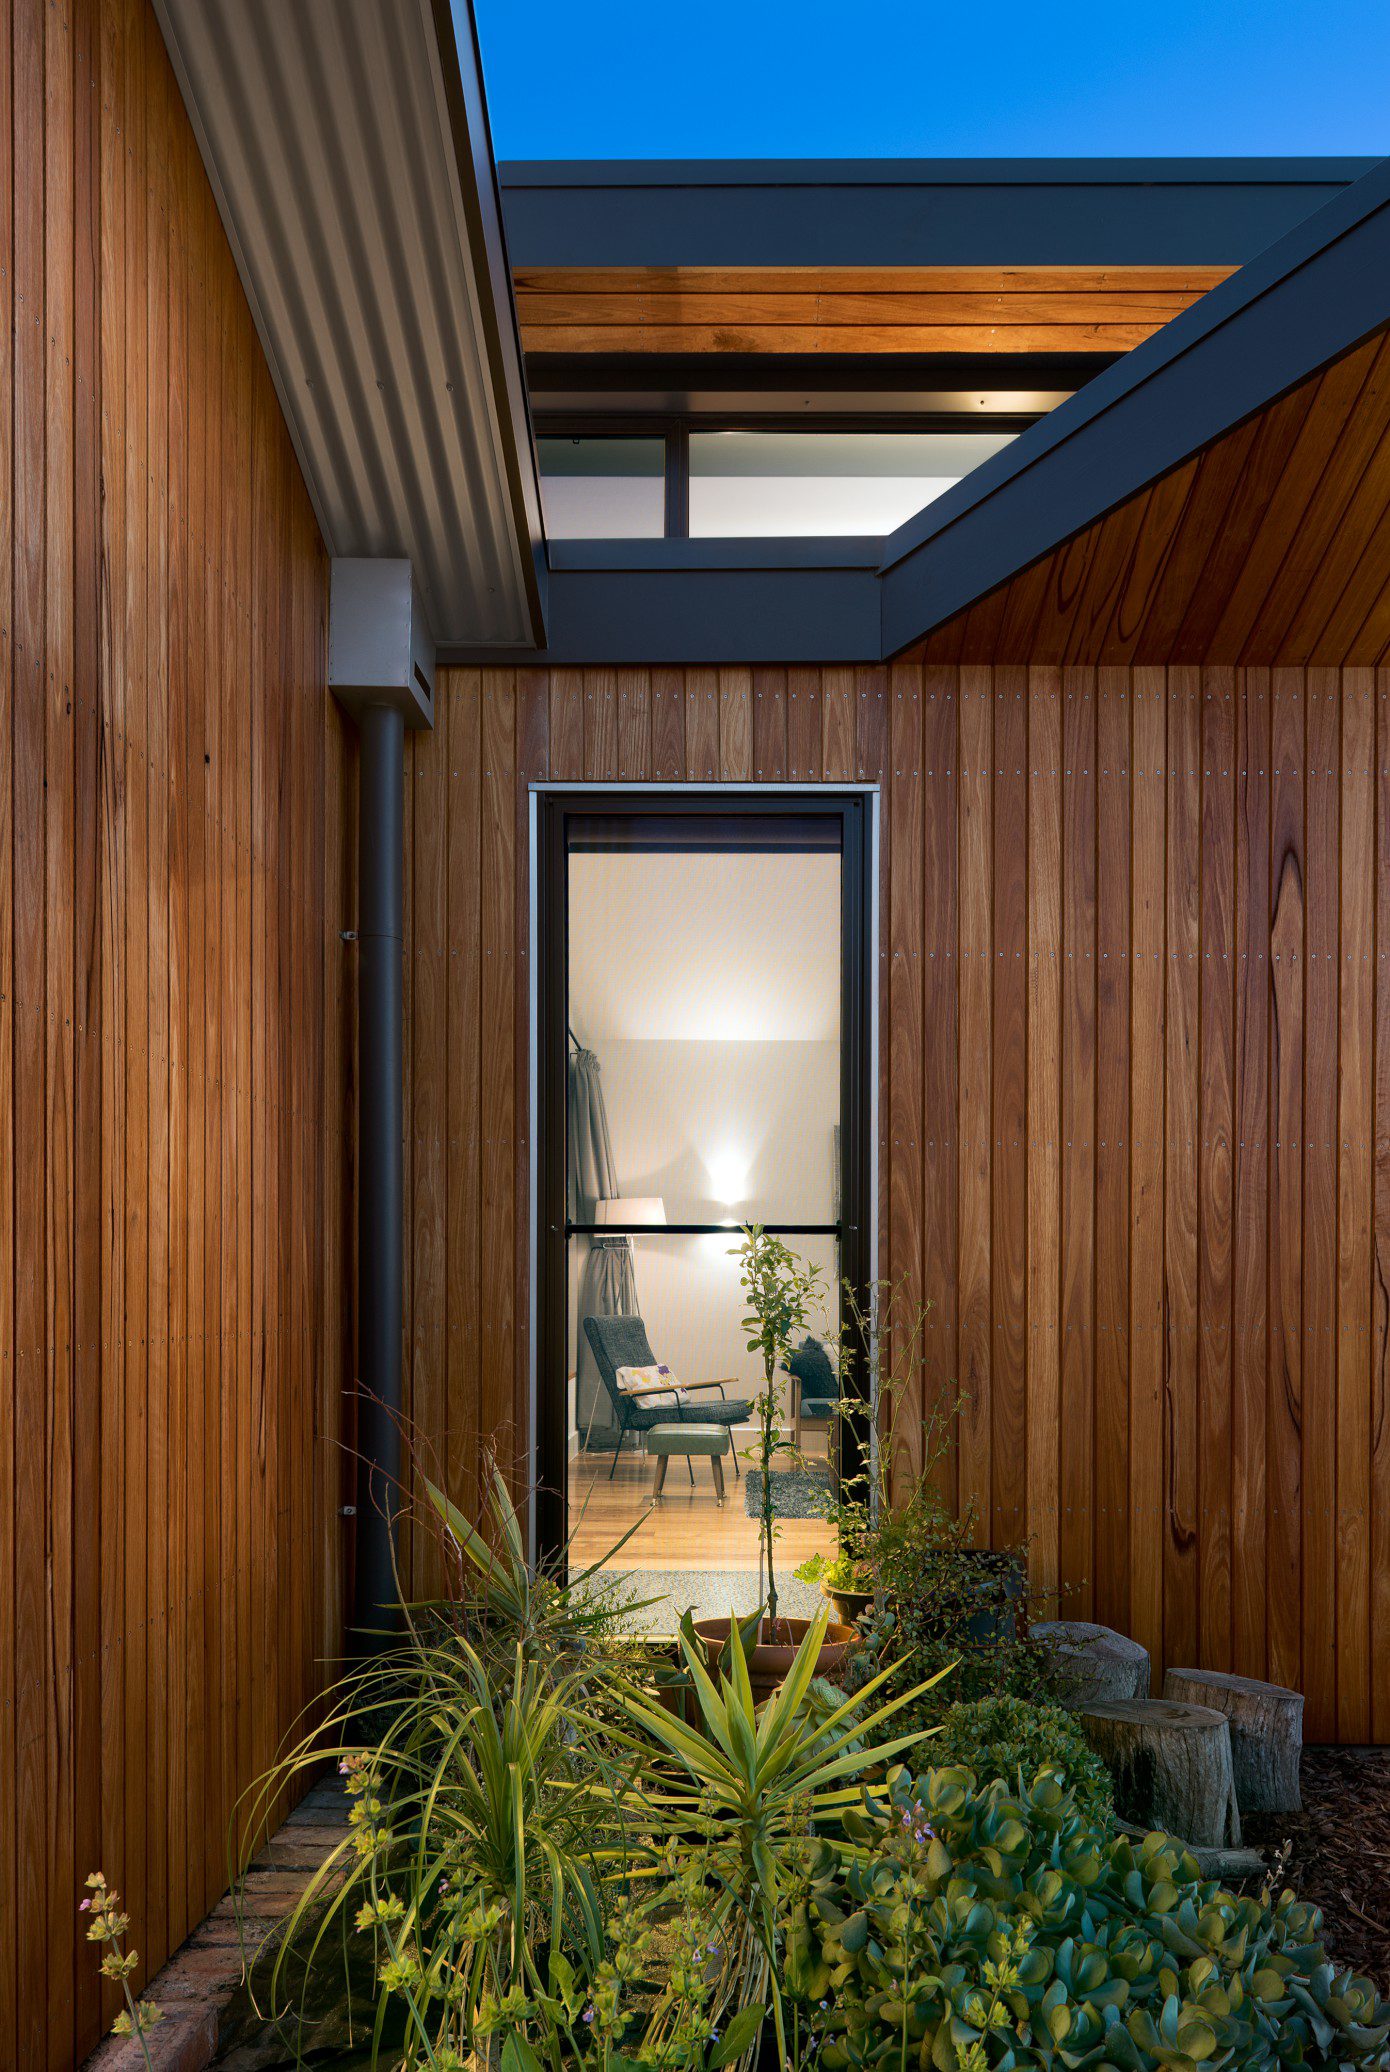 Northcote Solar Home by Green Sheep Collective